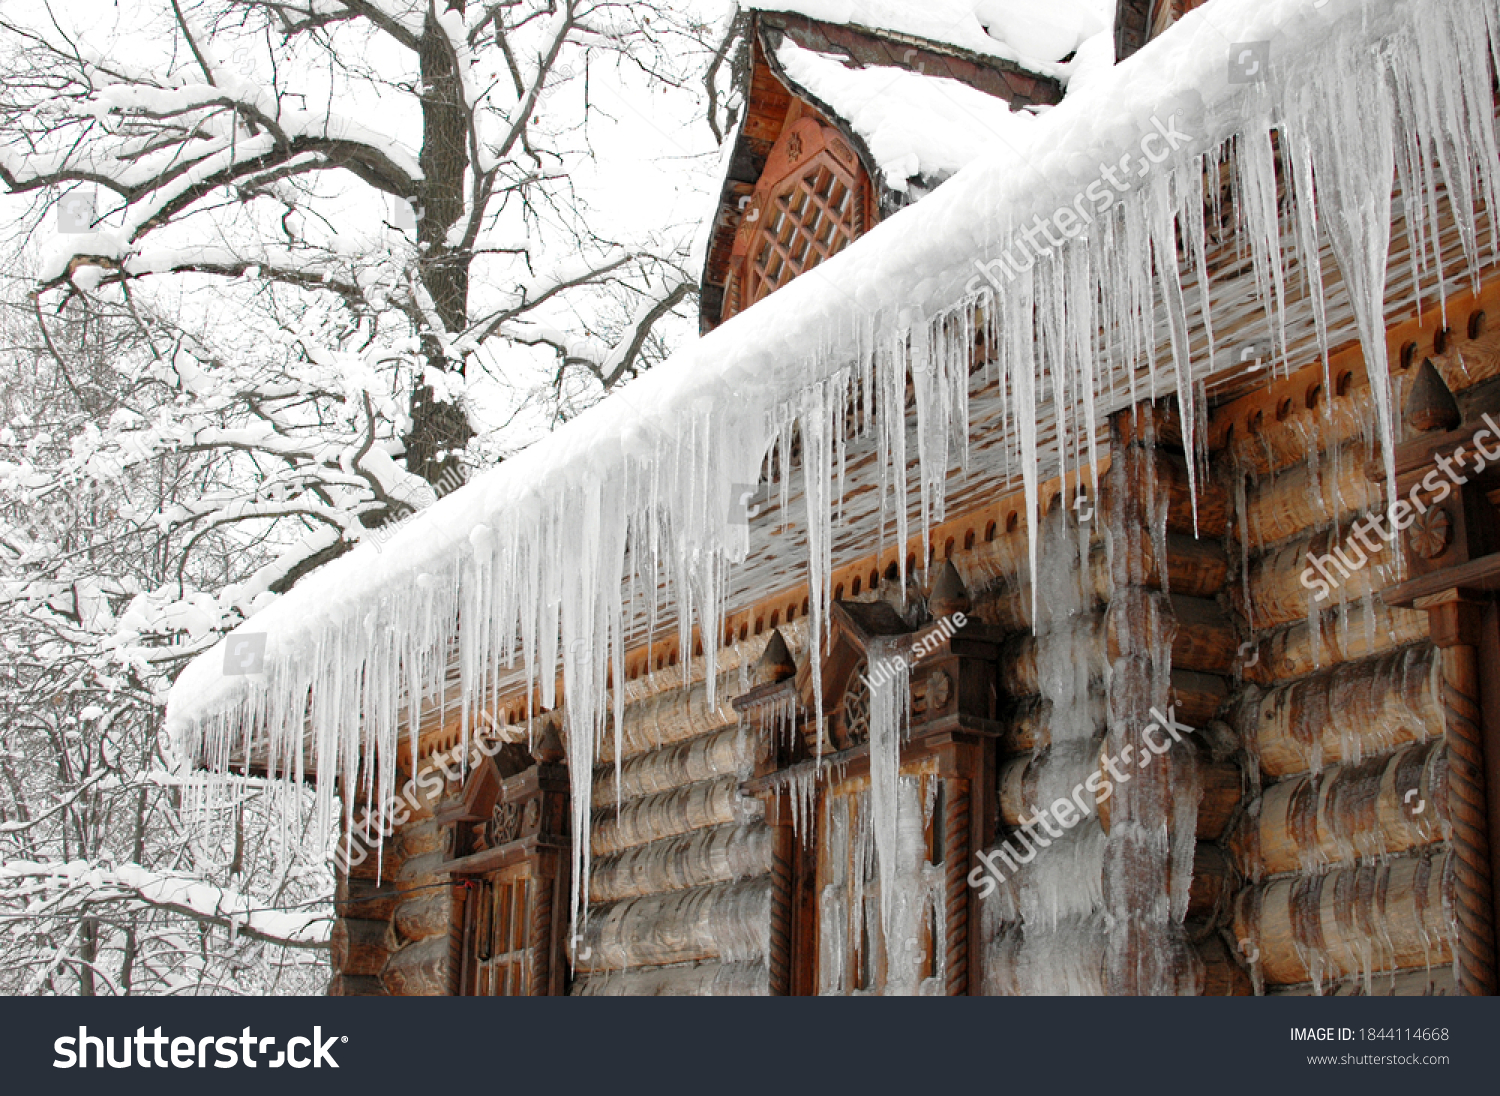 Icicles in winter. The old hut is covered with ice in winter. Icicles hang from the roof. The wooden tower is covered with ice. Icicles hang on the roof of a house. The logs of the hut were frozen #1844114668